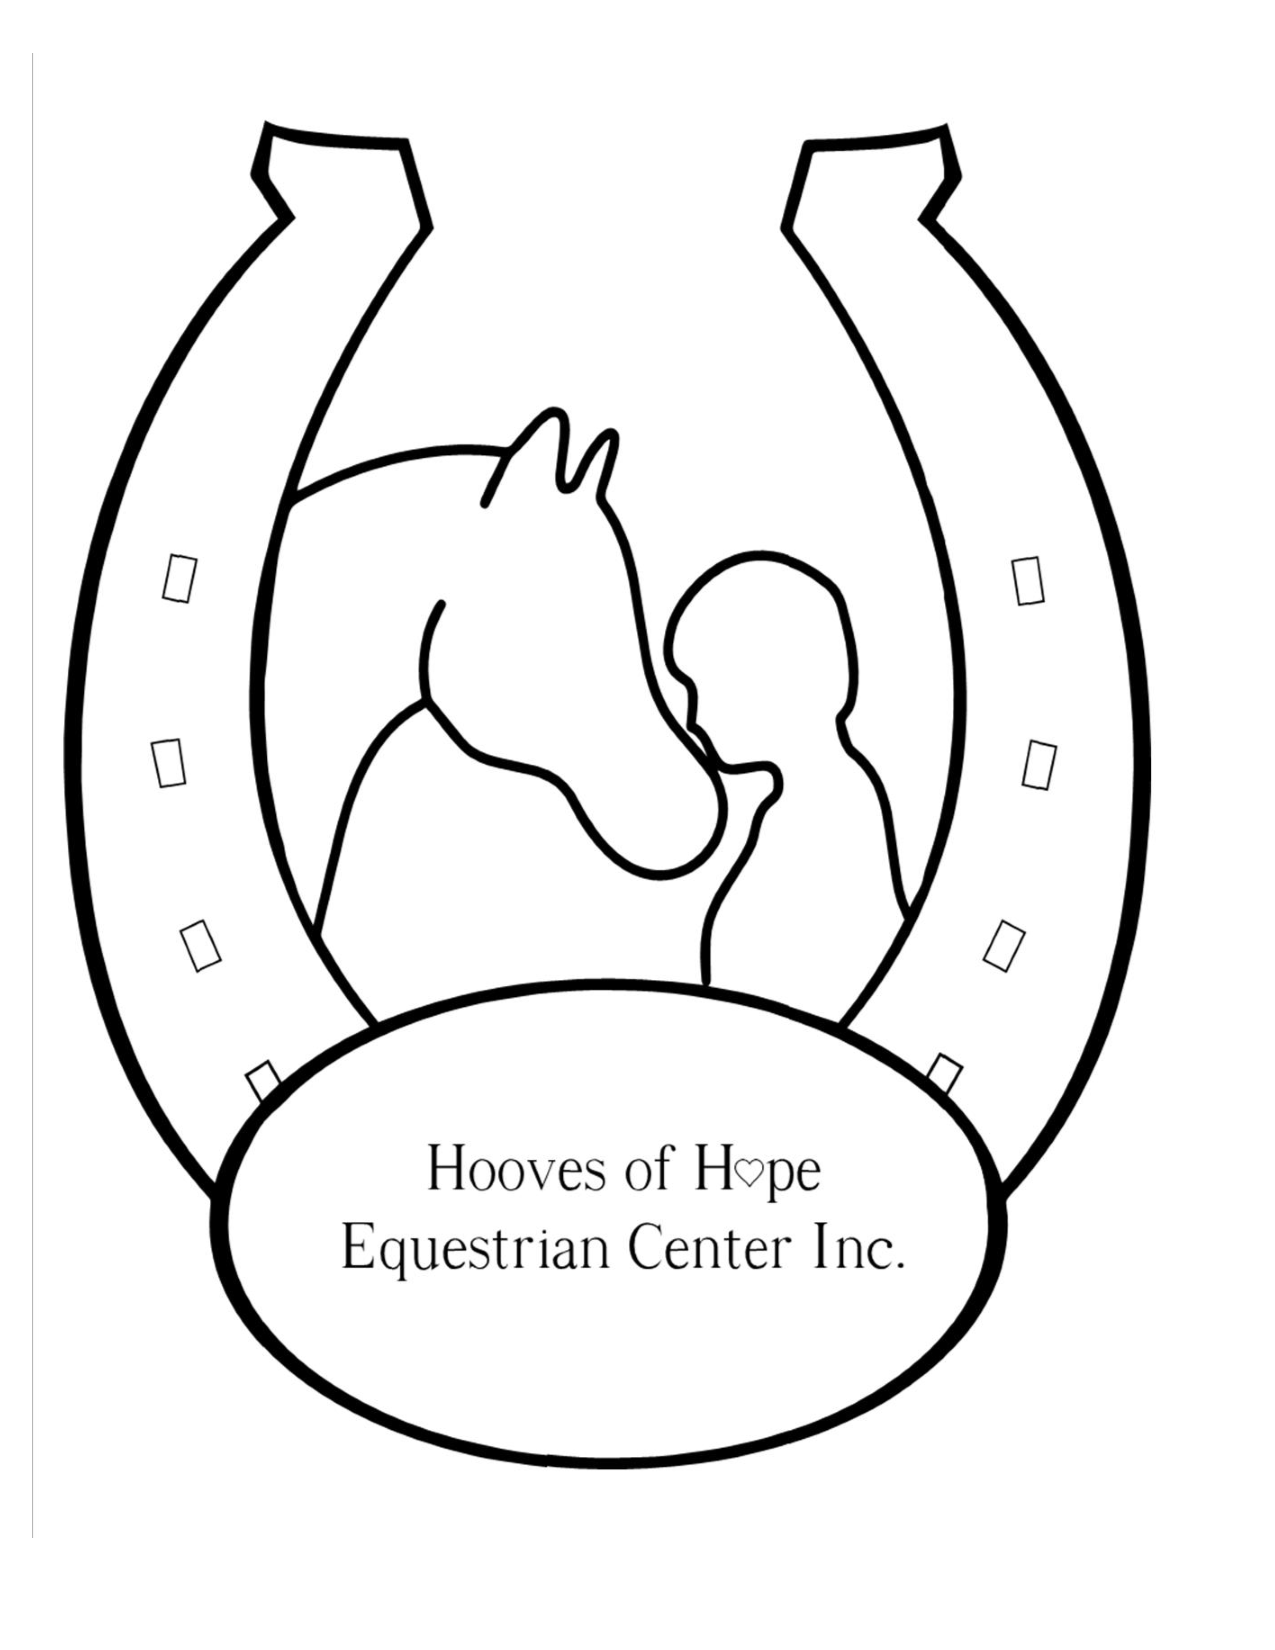 Hooves of Hope Equestrian Center, Inc.